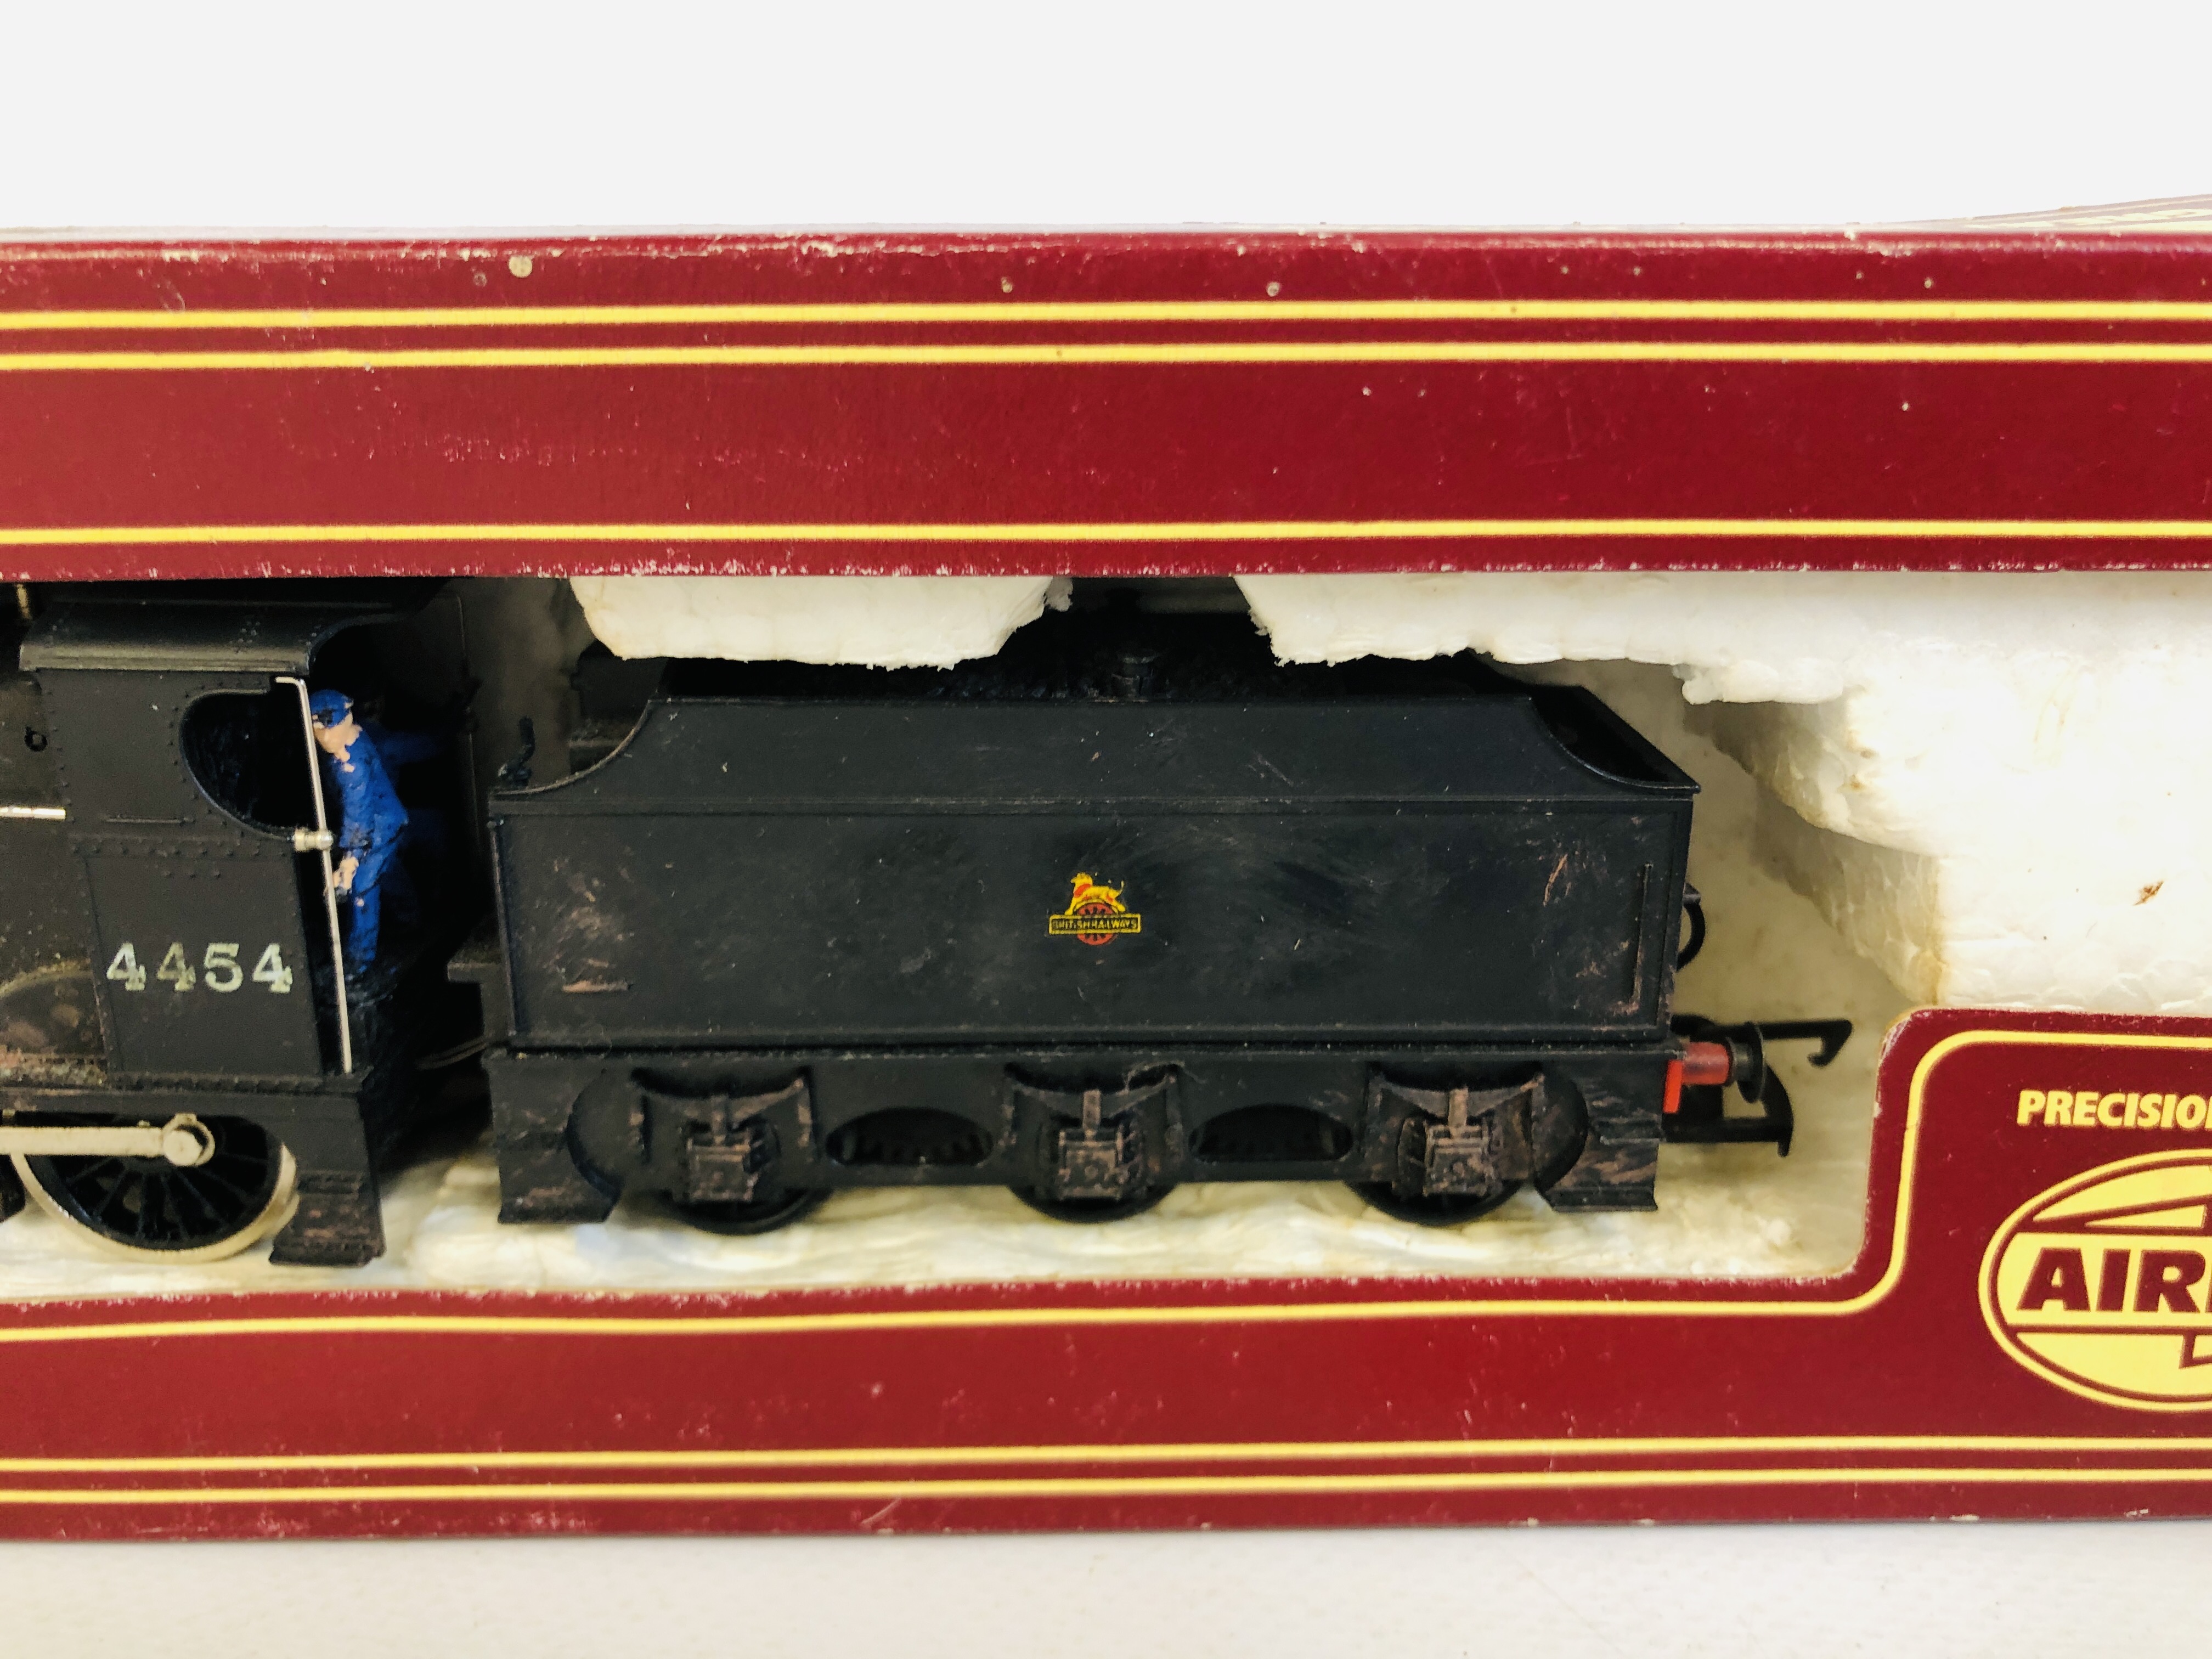 HORNBY 00 GAUGE 06003 LOCOMOTIVE BOXED AND AIRFIX GMR 4454 LOCOMOTIVE AND TENDER BOXED - Image 3 of 4